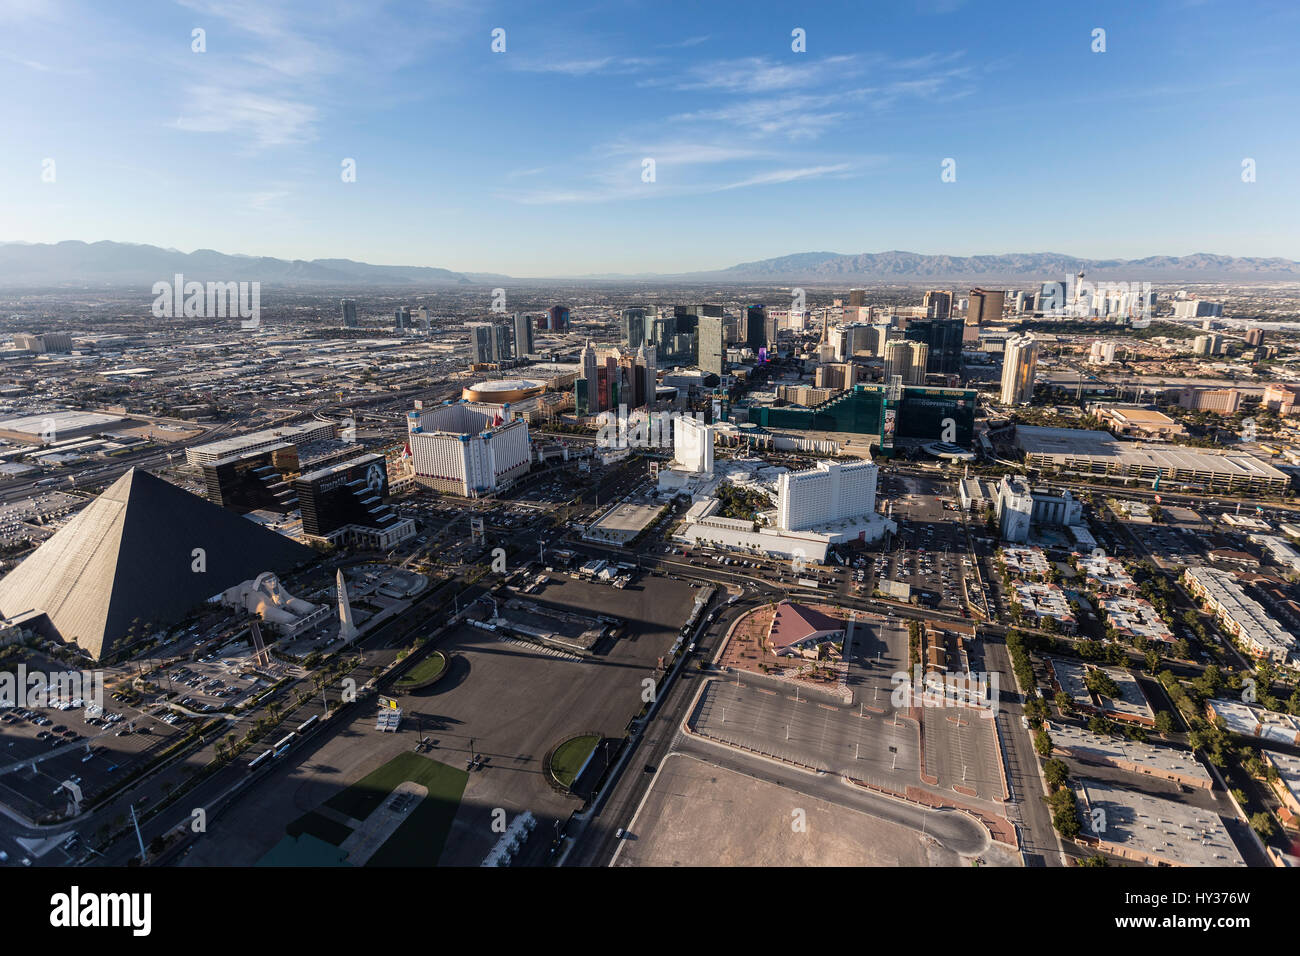 Las Vegas, Nevada, USA - March 13, 2017:  Aerial view of casino resorts along the Las Vegas Blvd in Southern Nevada. Stock Photo